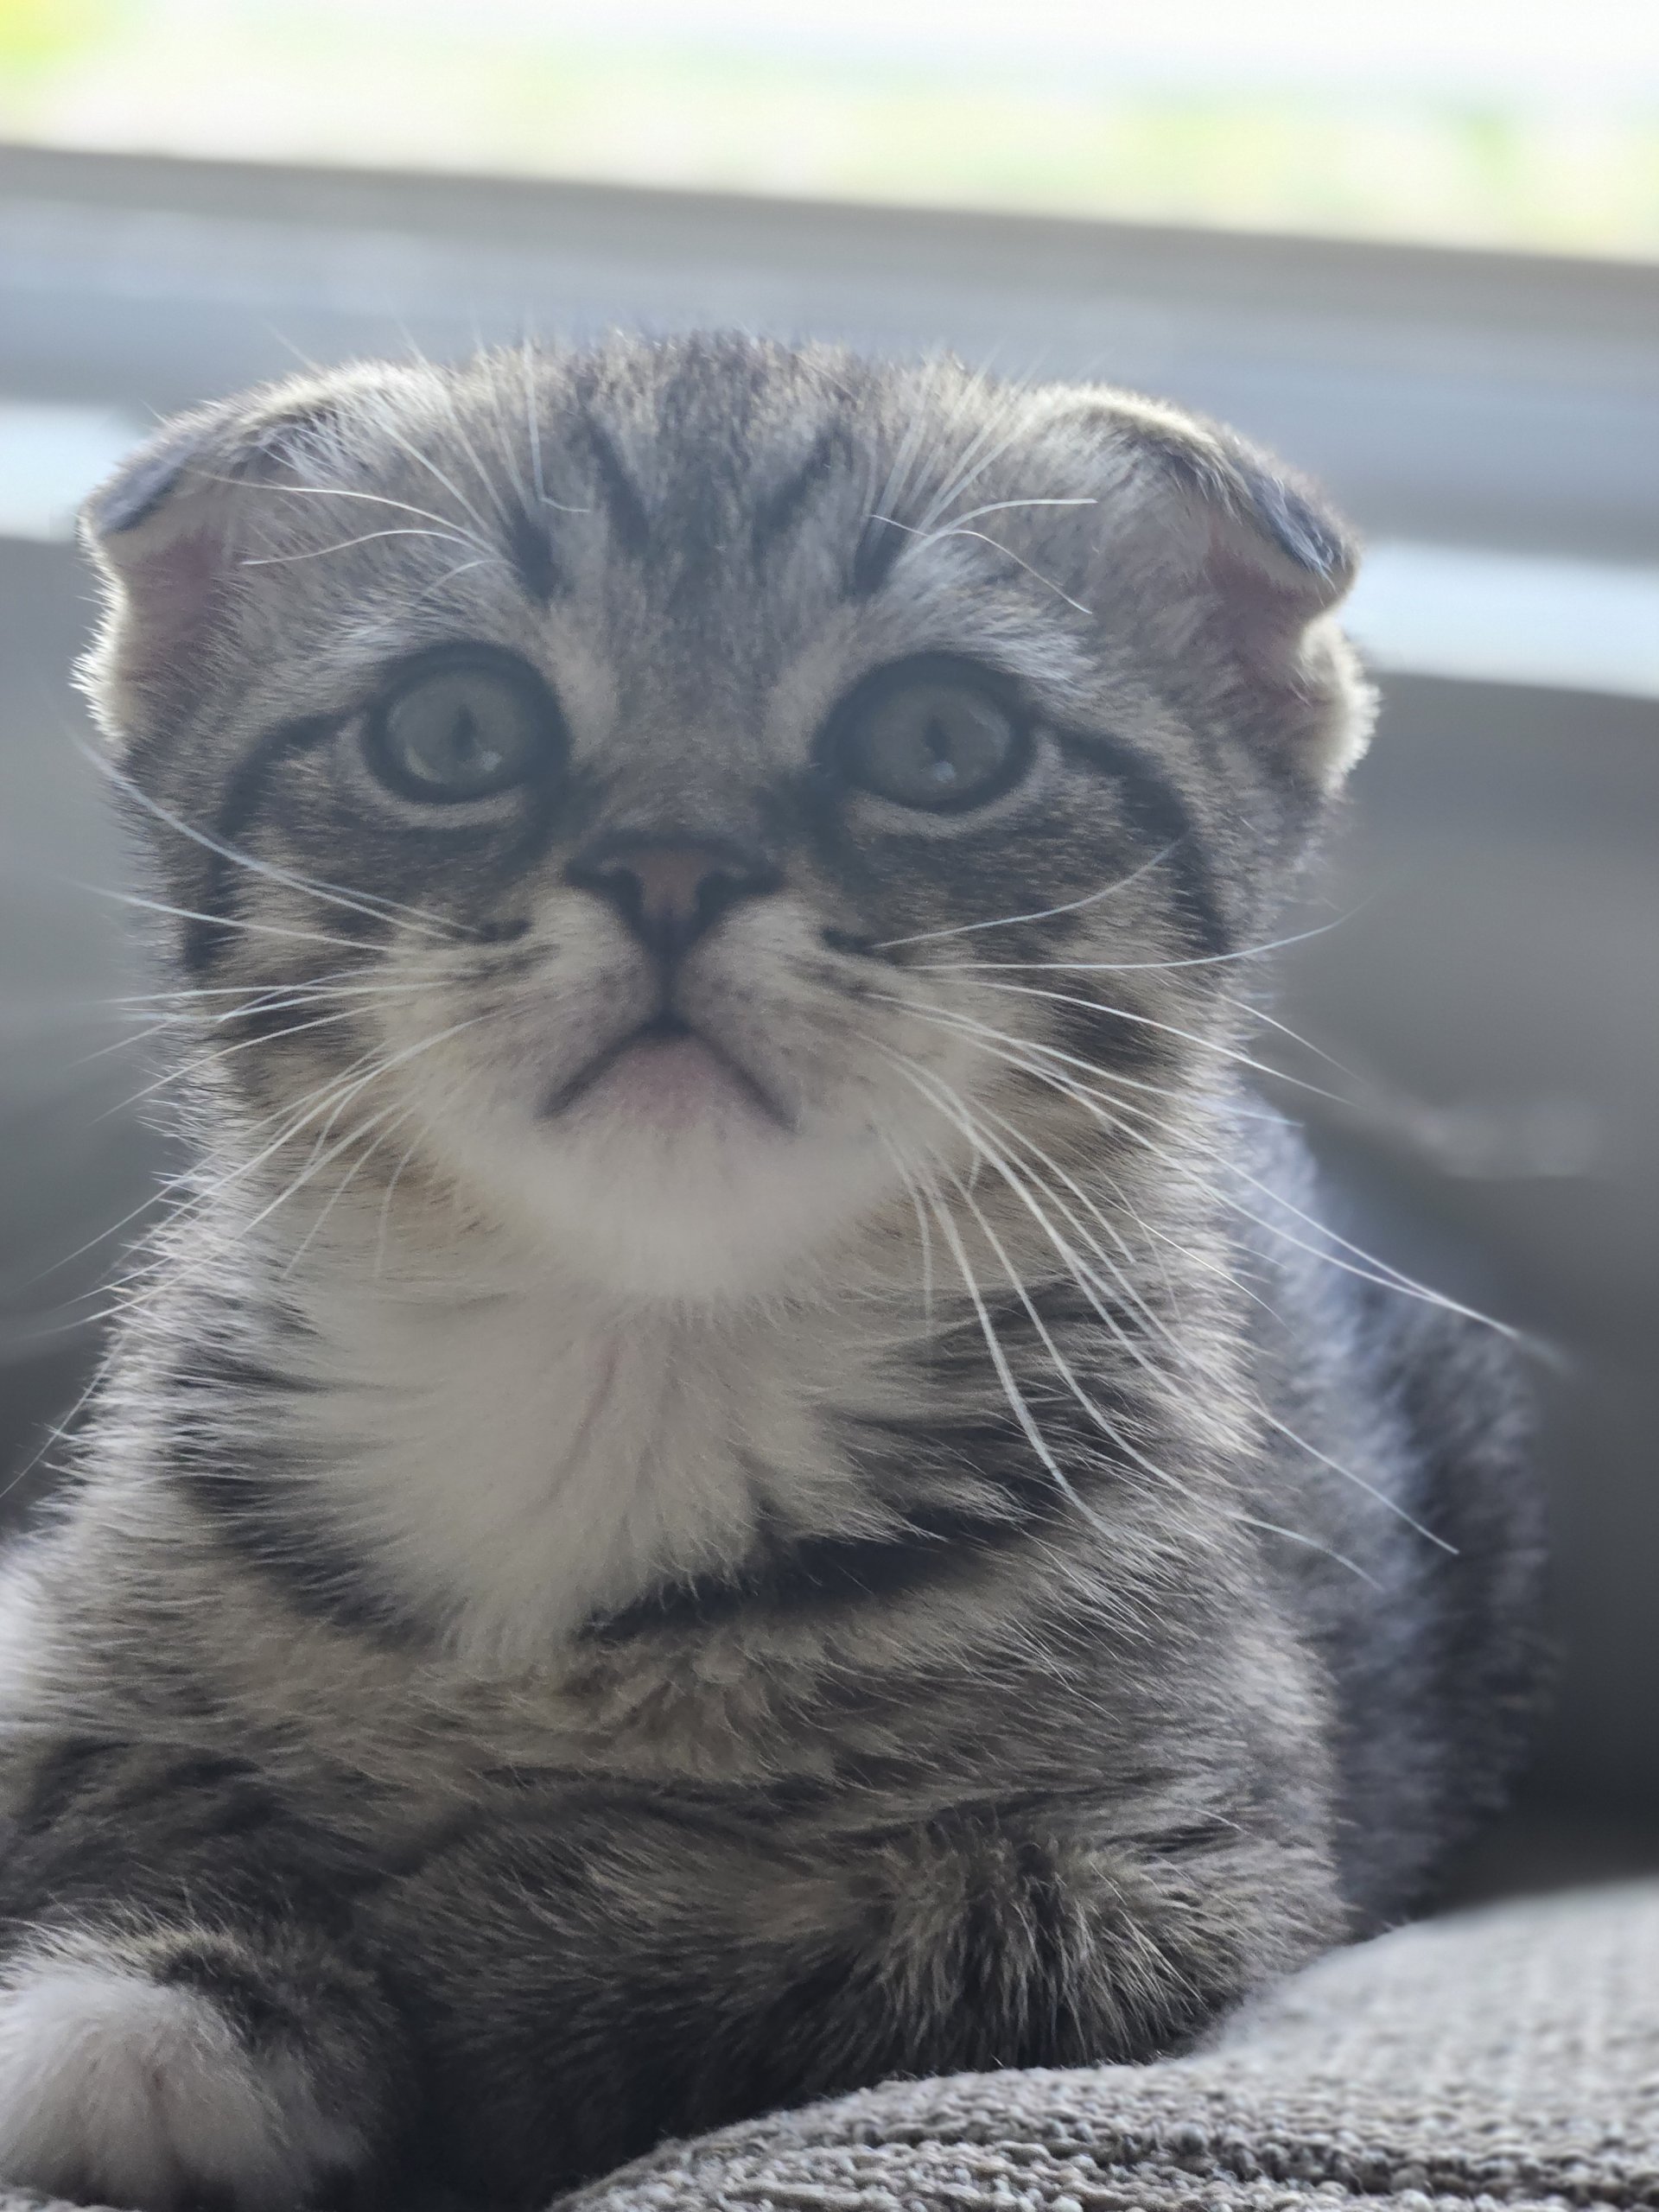 I have a scottish fold and his name is Noah. He's the sweetest lill guy, full of energy and spunk!